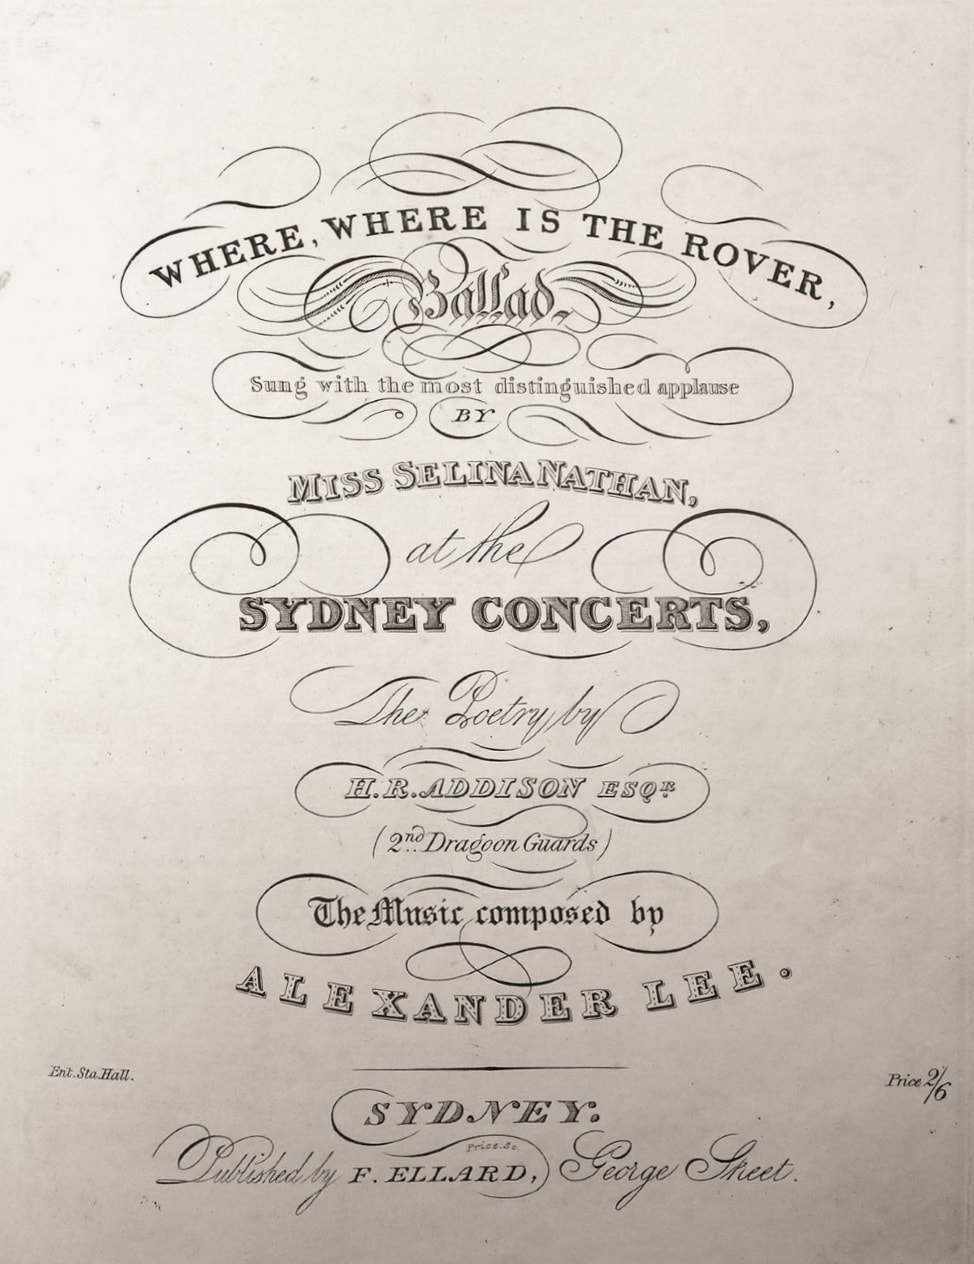 Where, where is the rover (Lee) . . . sung with the most distinguished praise by Miss Selina Nathan at the Sydney Concerts (Sydney, 1842)